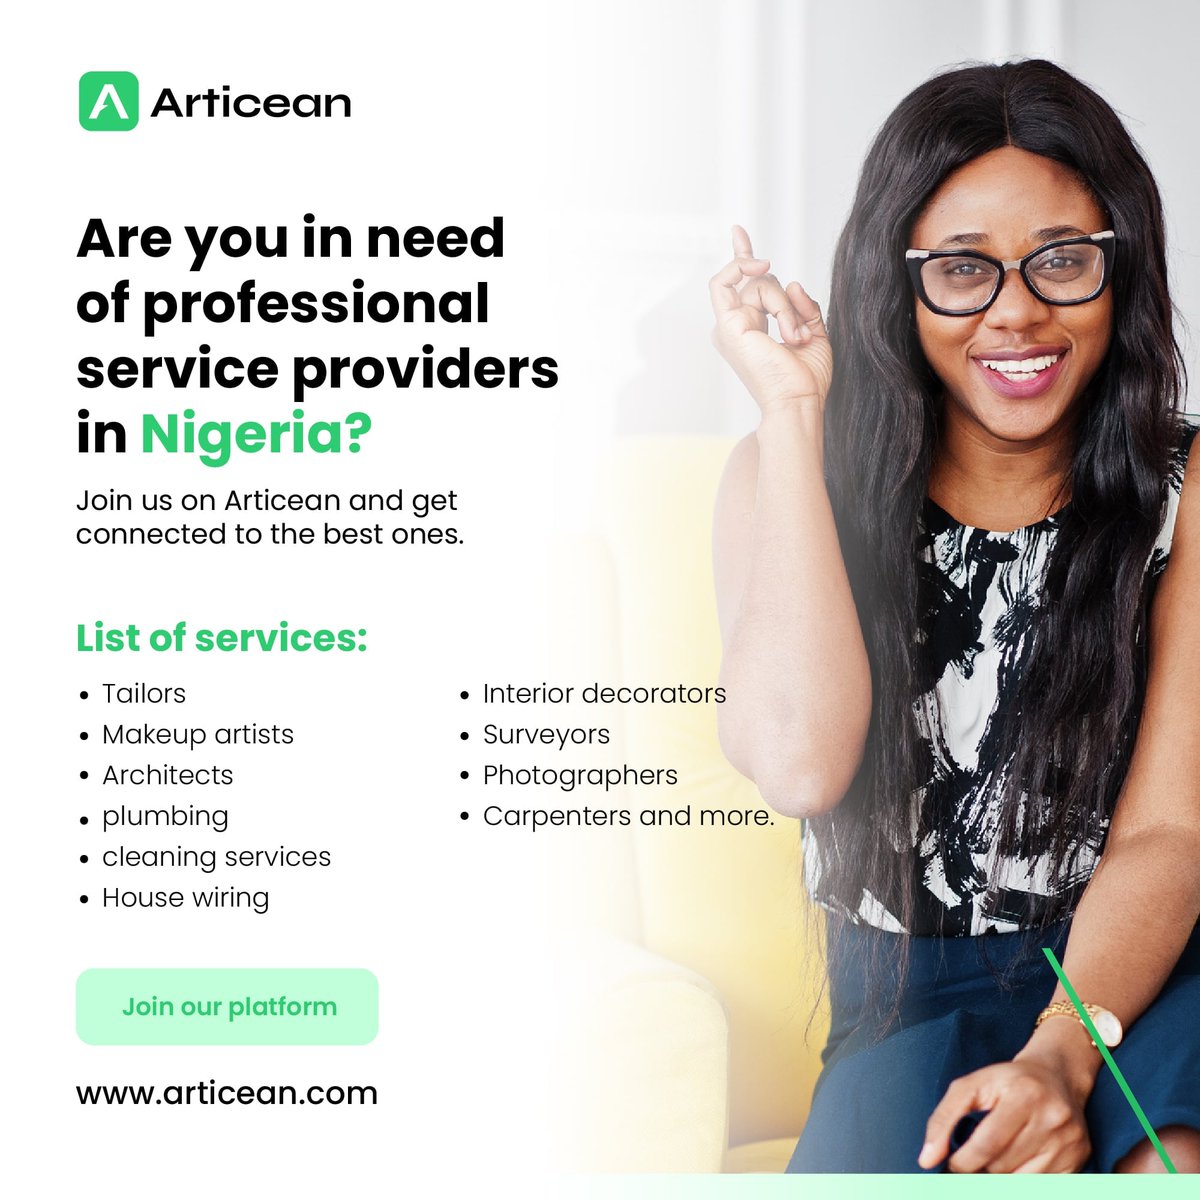 Signup on Articean today to get connected to the best offline service providers in Nigeria. 

Click on the link in our bio to join

#Articean #nigerianarchitects #skilledartisans #offlineservice